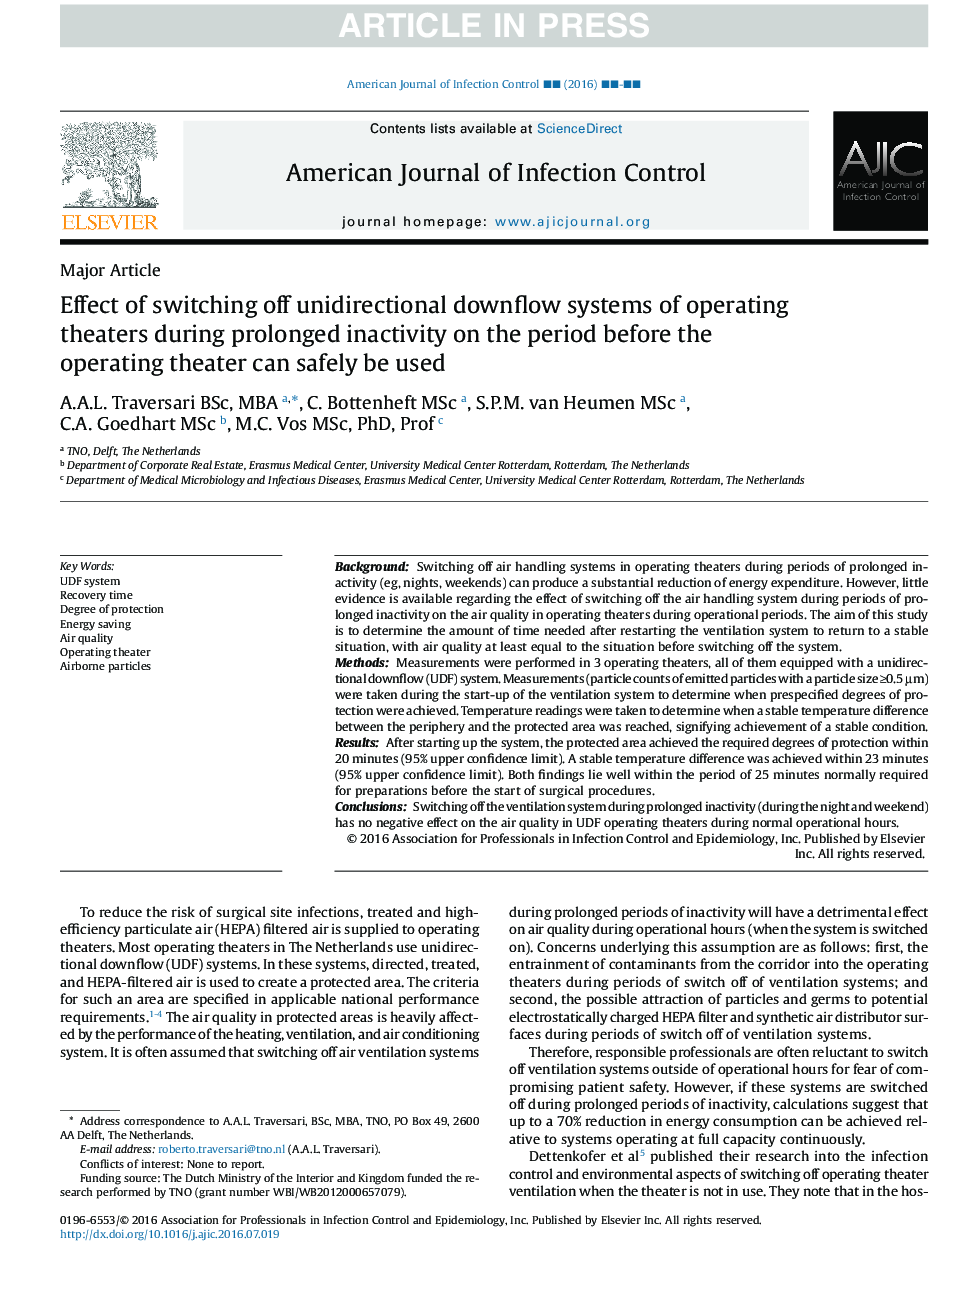 Effect of switching off unidirectional downflow systems of operating theaters during prolonged inactivity on the period before the operating theater can safely be used